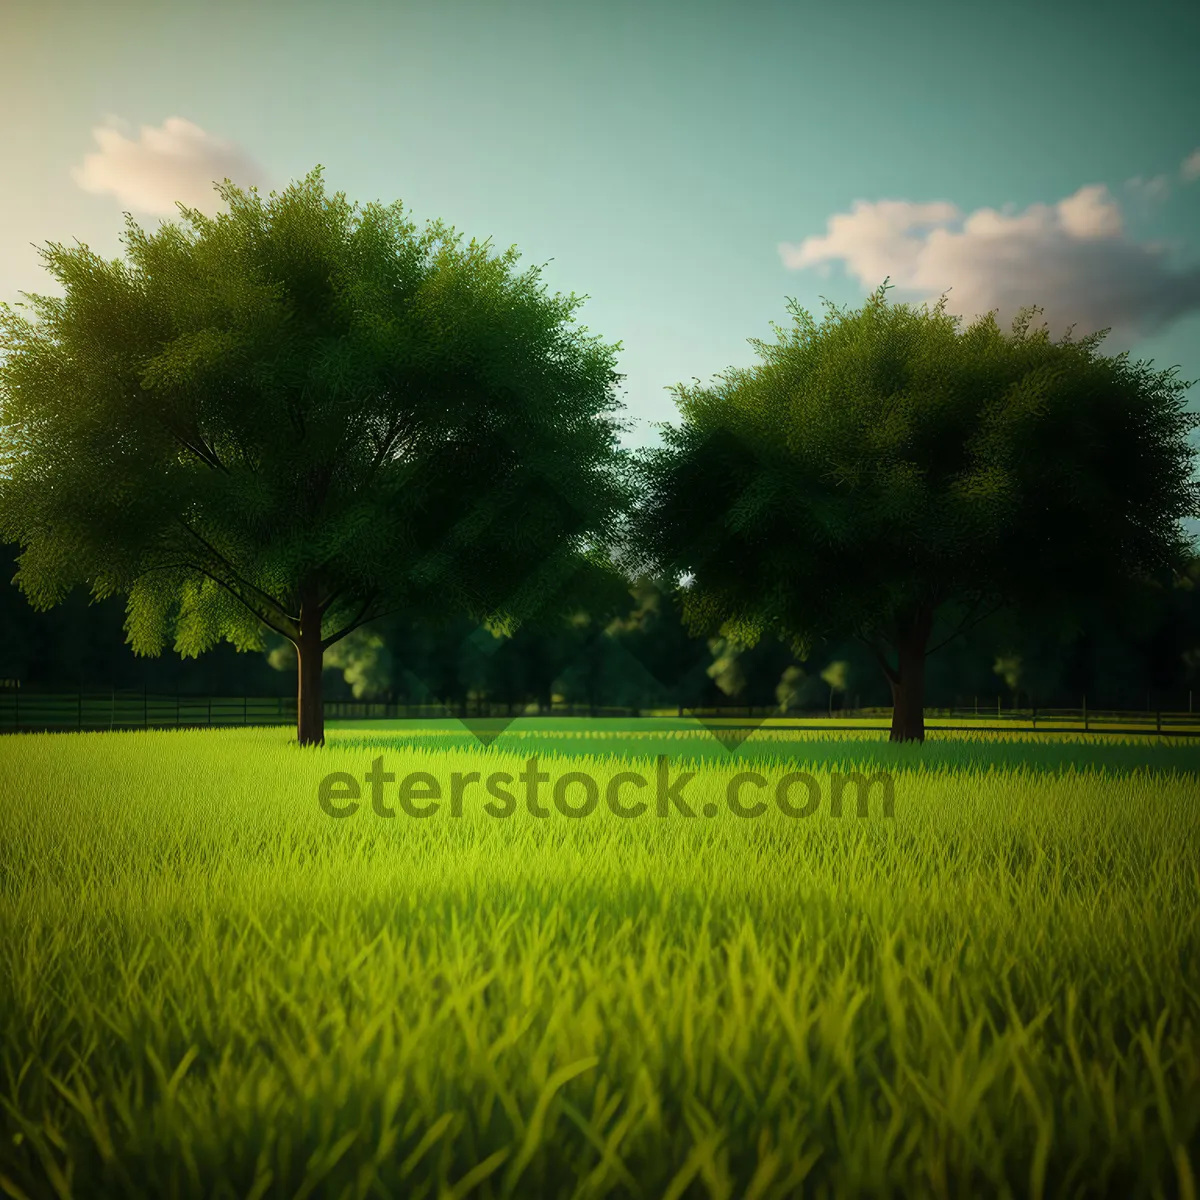 Picture of Bountiful Rice Fields under Clear Summer Sky"
(Note: This is just an example; the actual image may vary)